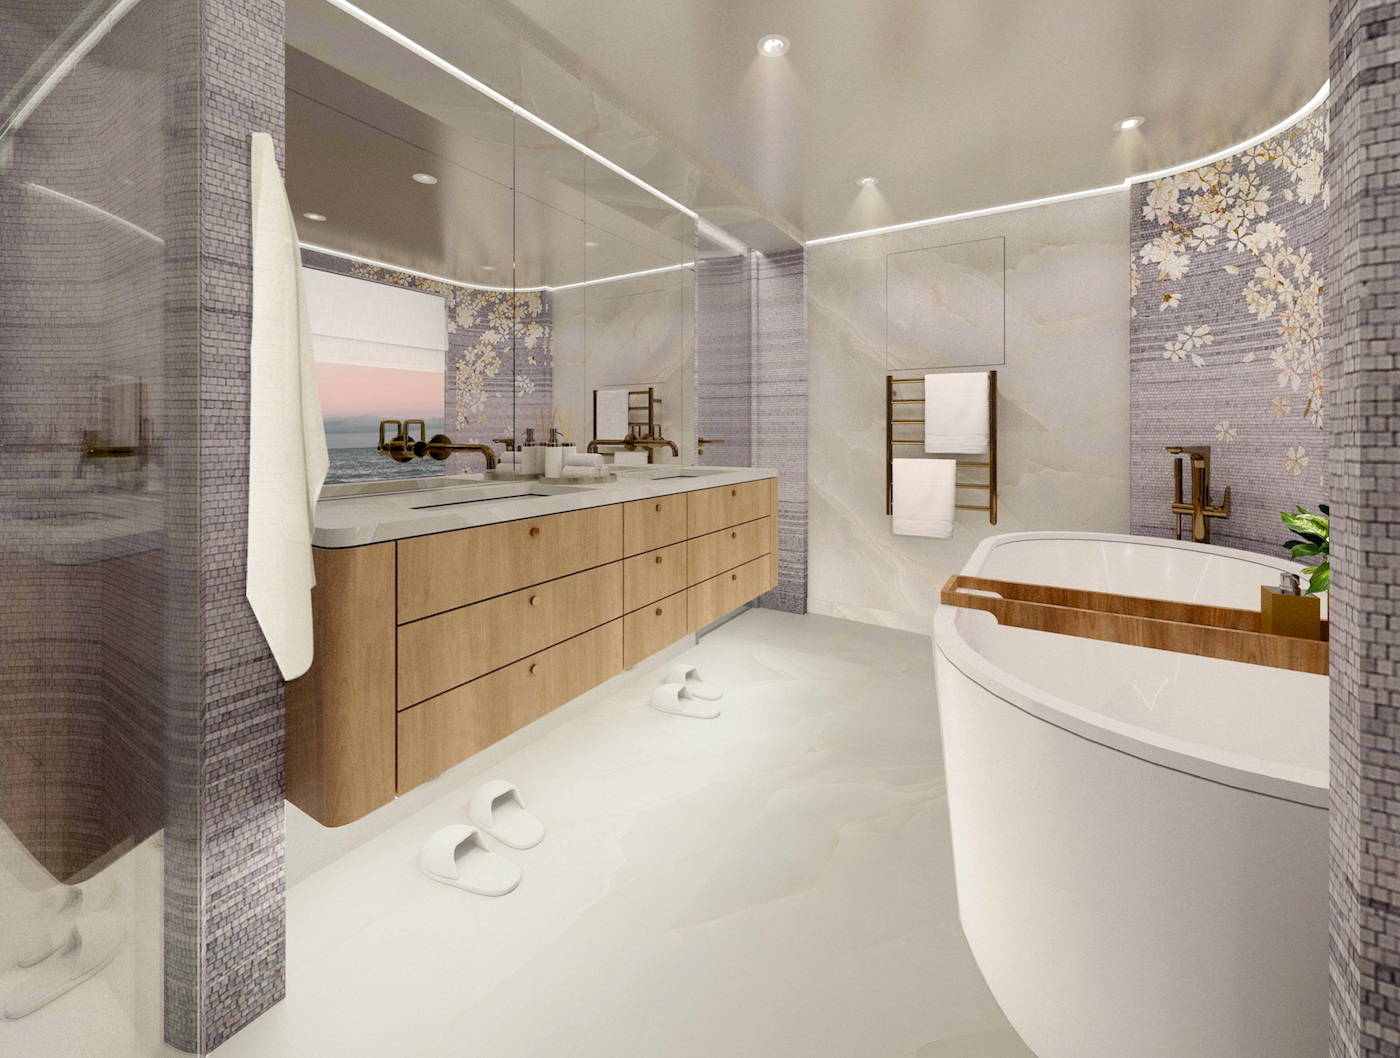 Sky Deck-Ensuite For Private Superyacht Refit Designed By Keeley Green Interior Design